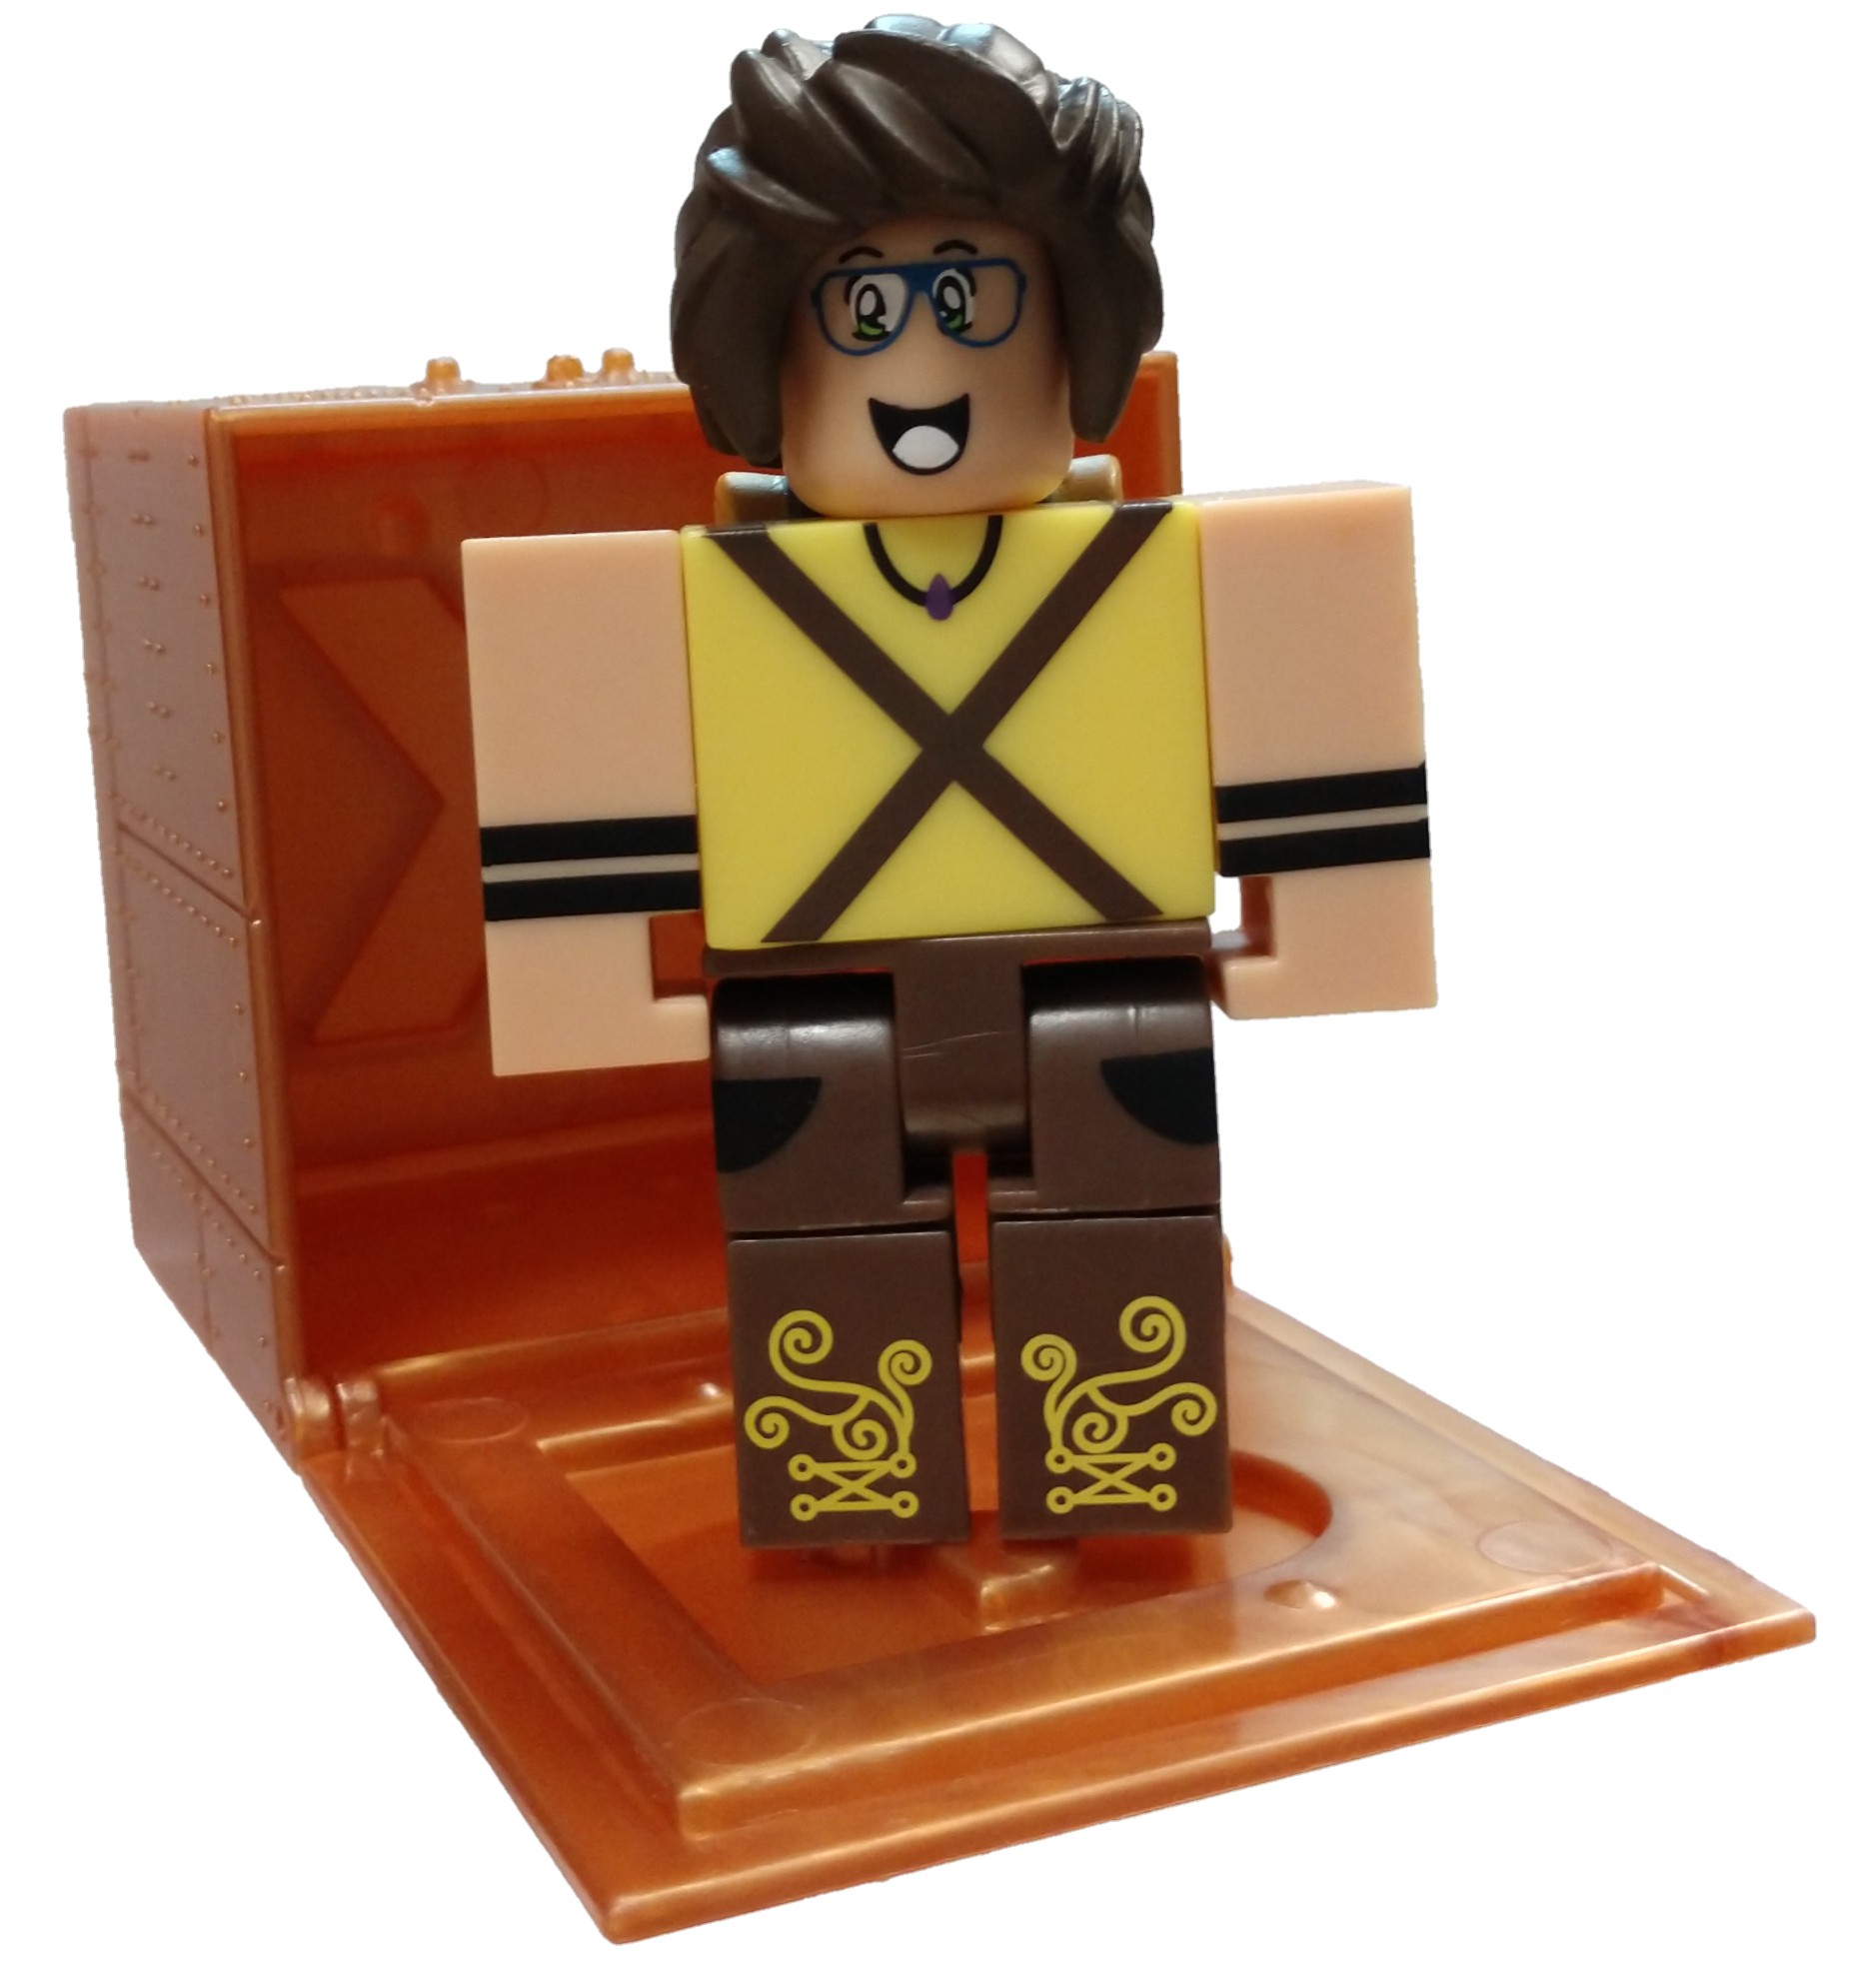 Roblox Series 8 Ghost Simulator Dylan Mini Figure With Code Ebay - 8 best roblox images